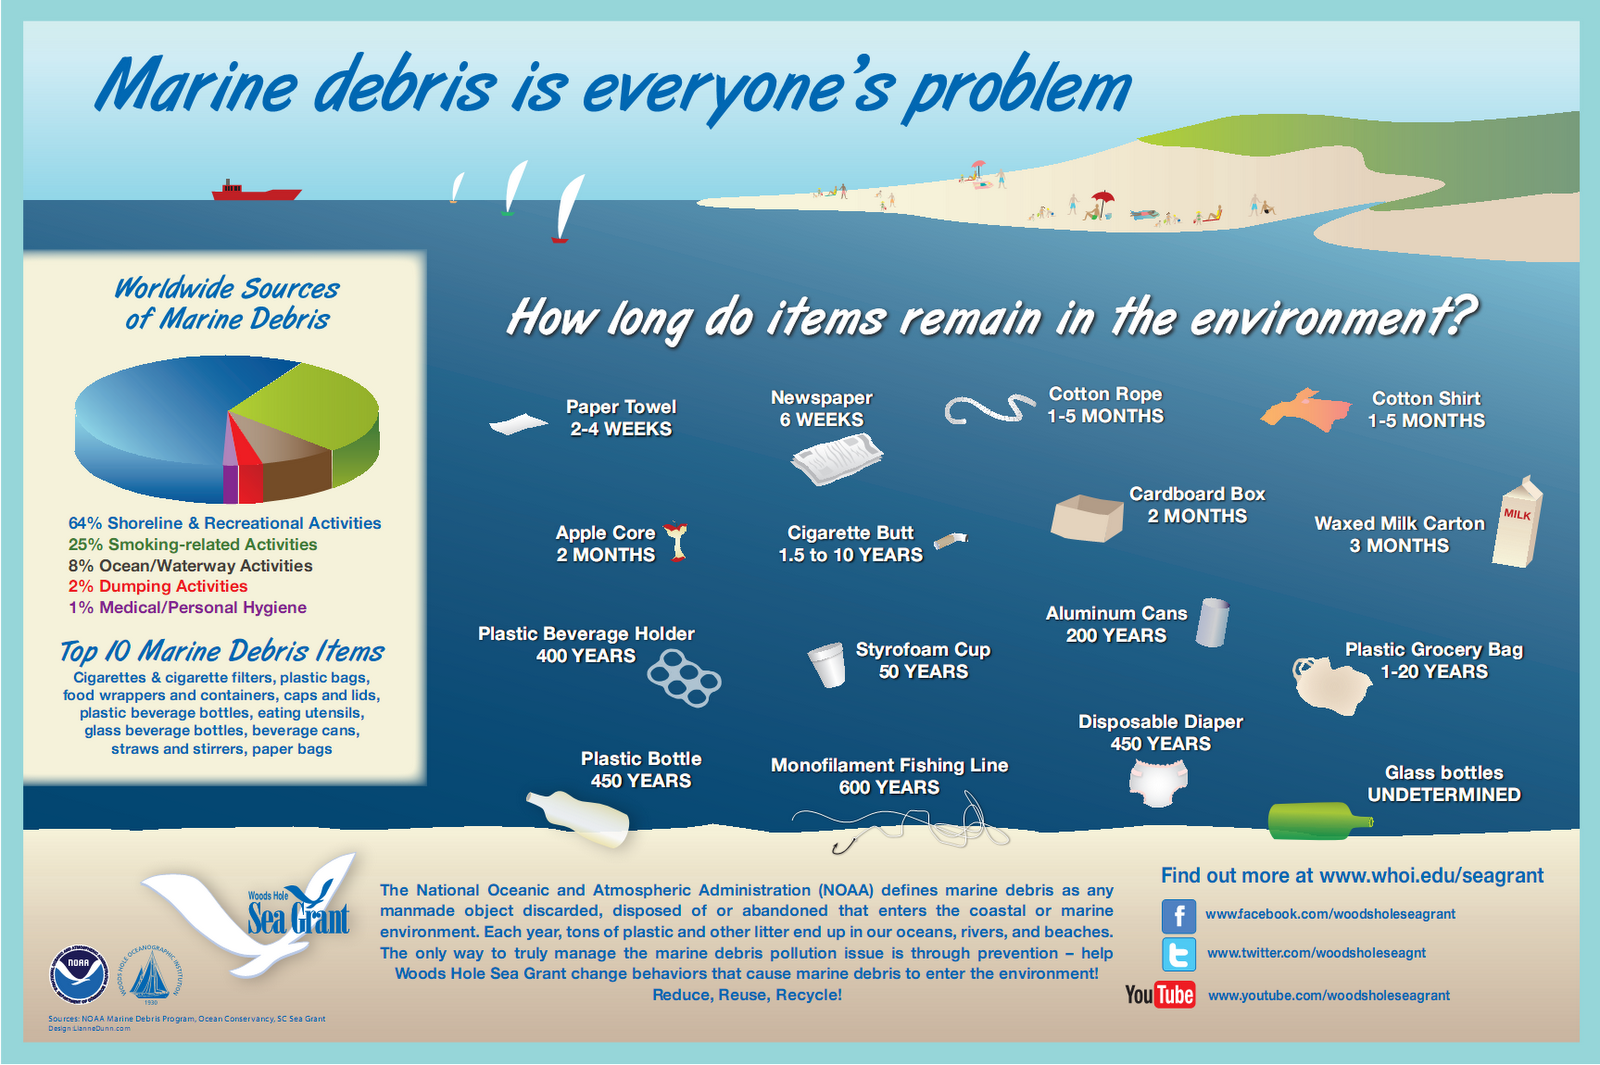 marine debris is everyone's problem infographic.png